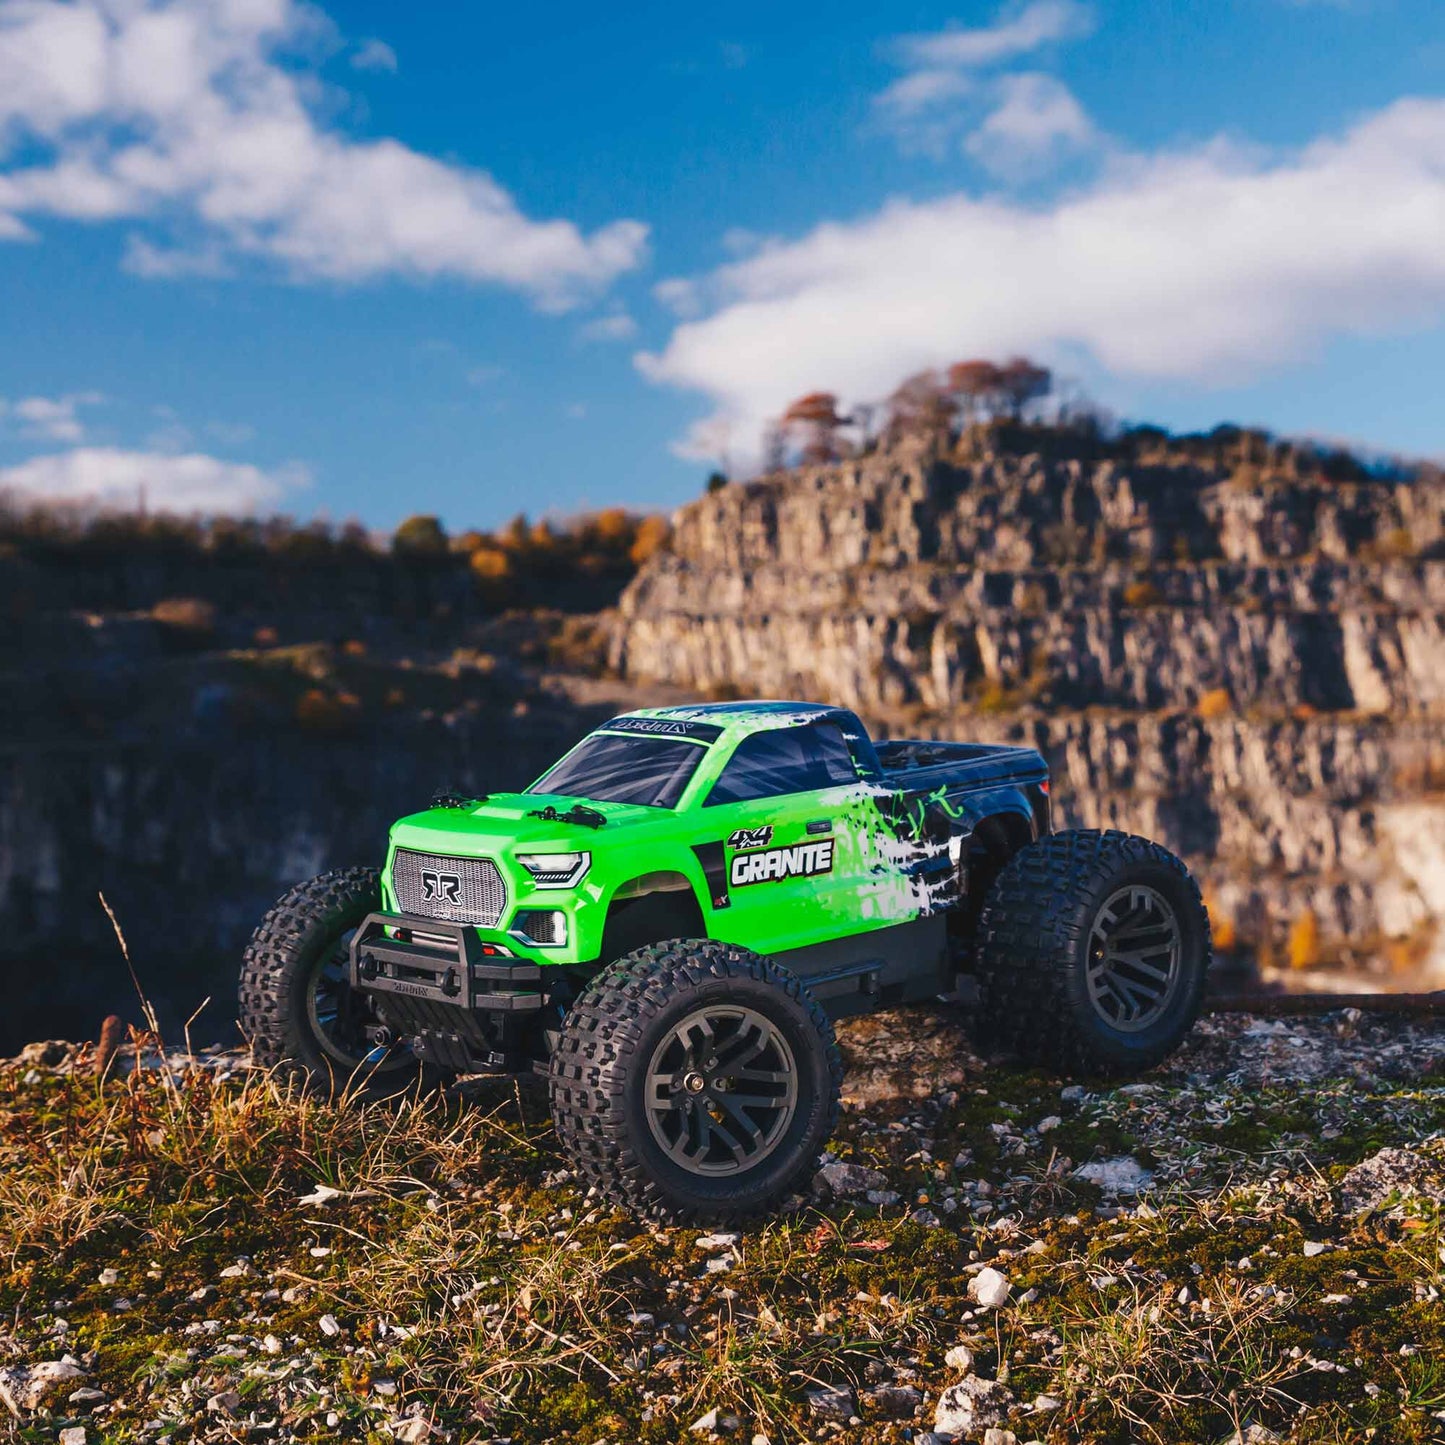 1/10 GRANITE 4X4 3S BLX Brushless 1/10th 4wd MT Green - Dirt Cheap RC SAVING YOU MONEY, ONE PART AT A TIME